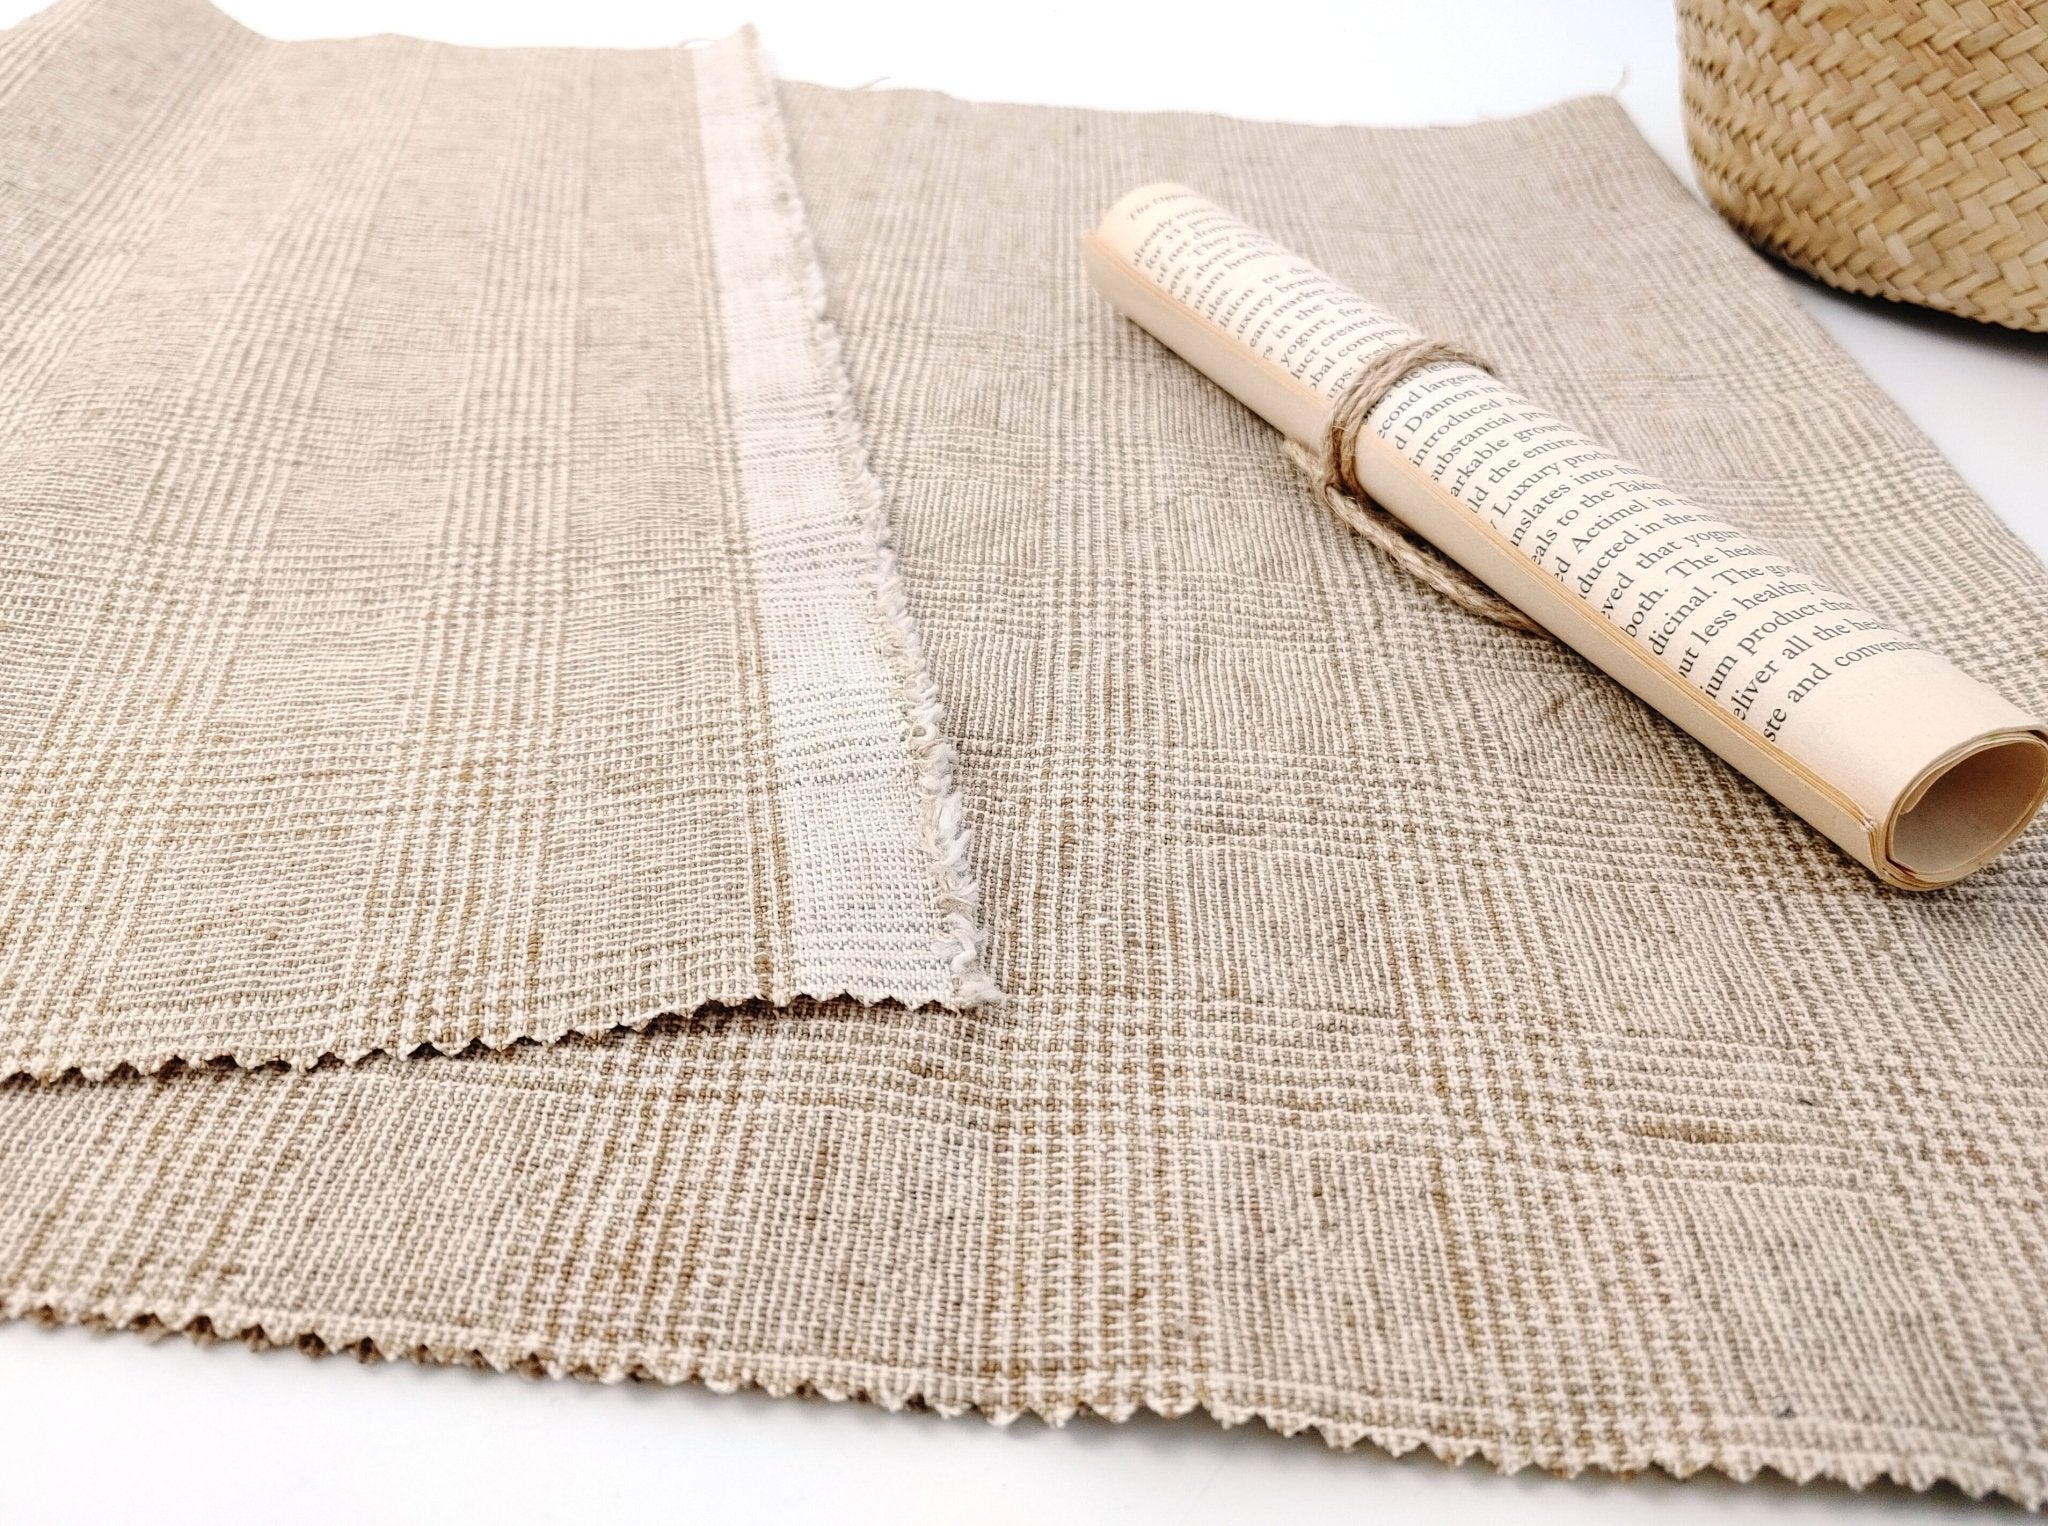 Premium Linen Cotton Beige Glen Plaid Fabric Heavy Weight: Timeless Elegance for Your Wardrobe and Home Décor 7598 - The Linen Lab - Beige